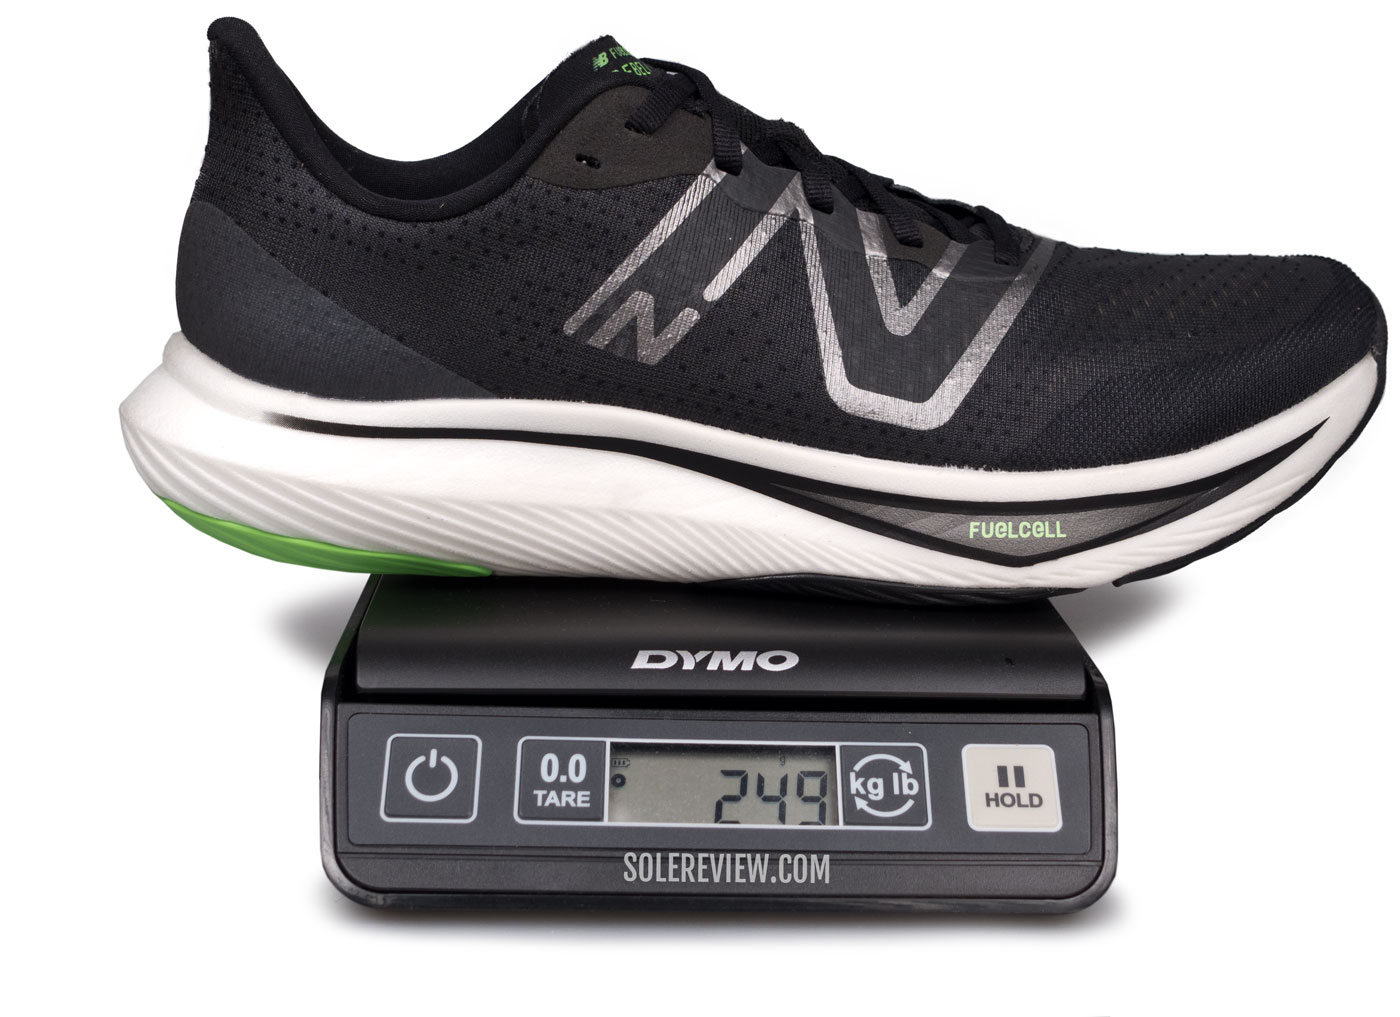 The weight of the New Balance Fuelcell Rebel V3.